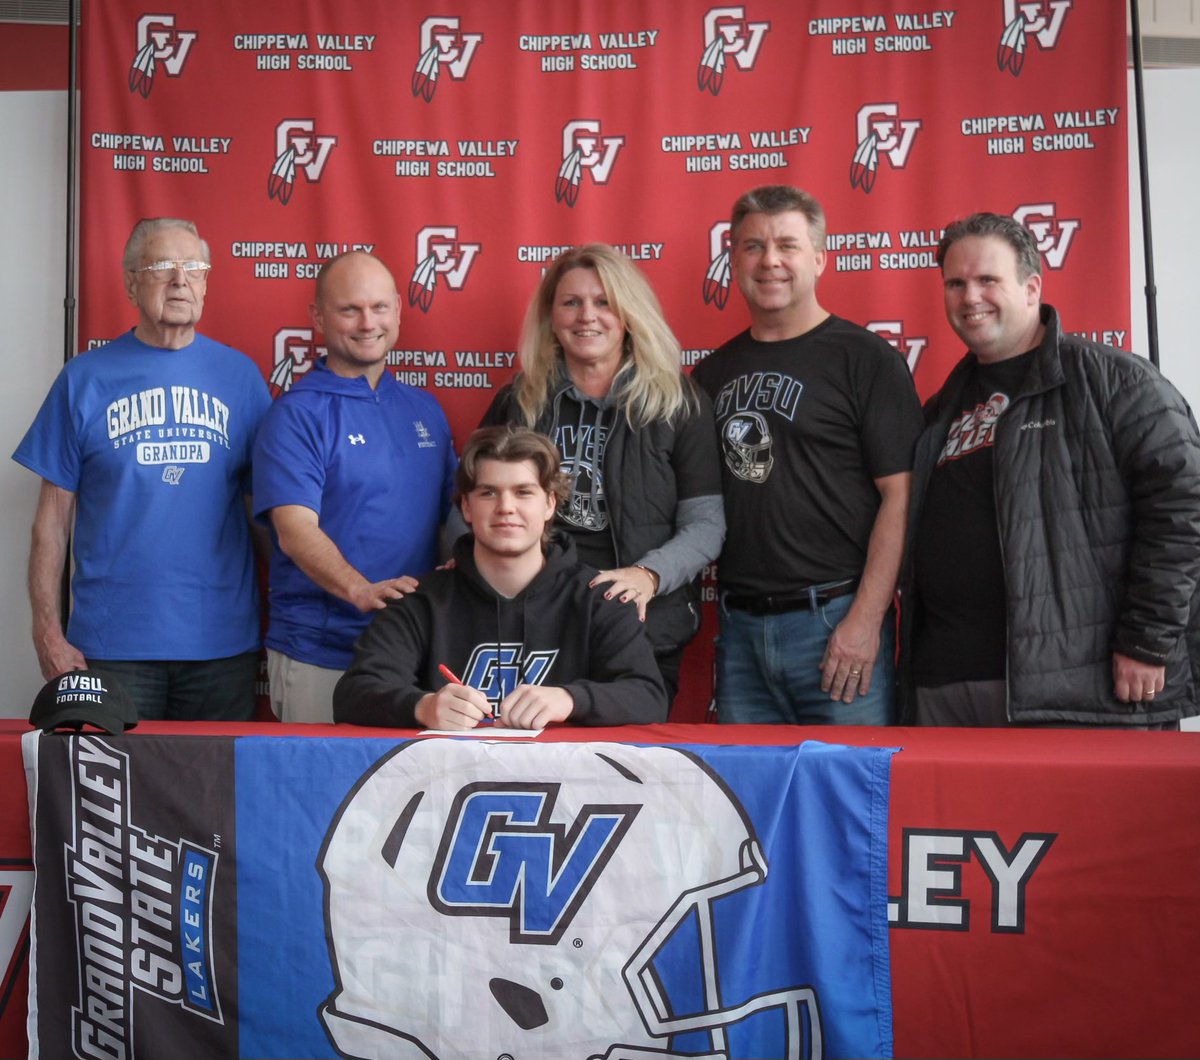 Congratulations to Andrew on signing with Grand Valley State to study Business and play the great game of football.  We are thankful for his Chippewa Valley football coaches, teammates, families & community!  #HWPO  #AnchorUp  #GodsPlan ✝️🙏